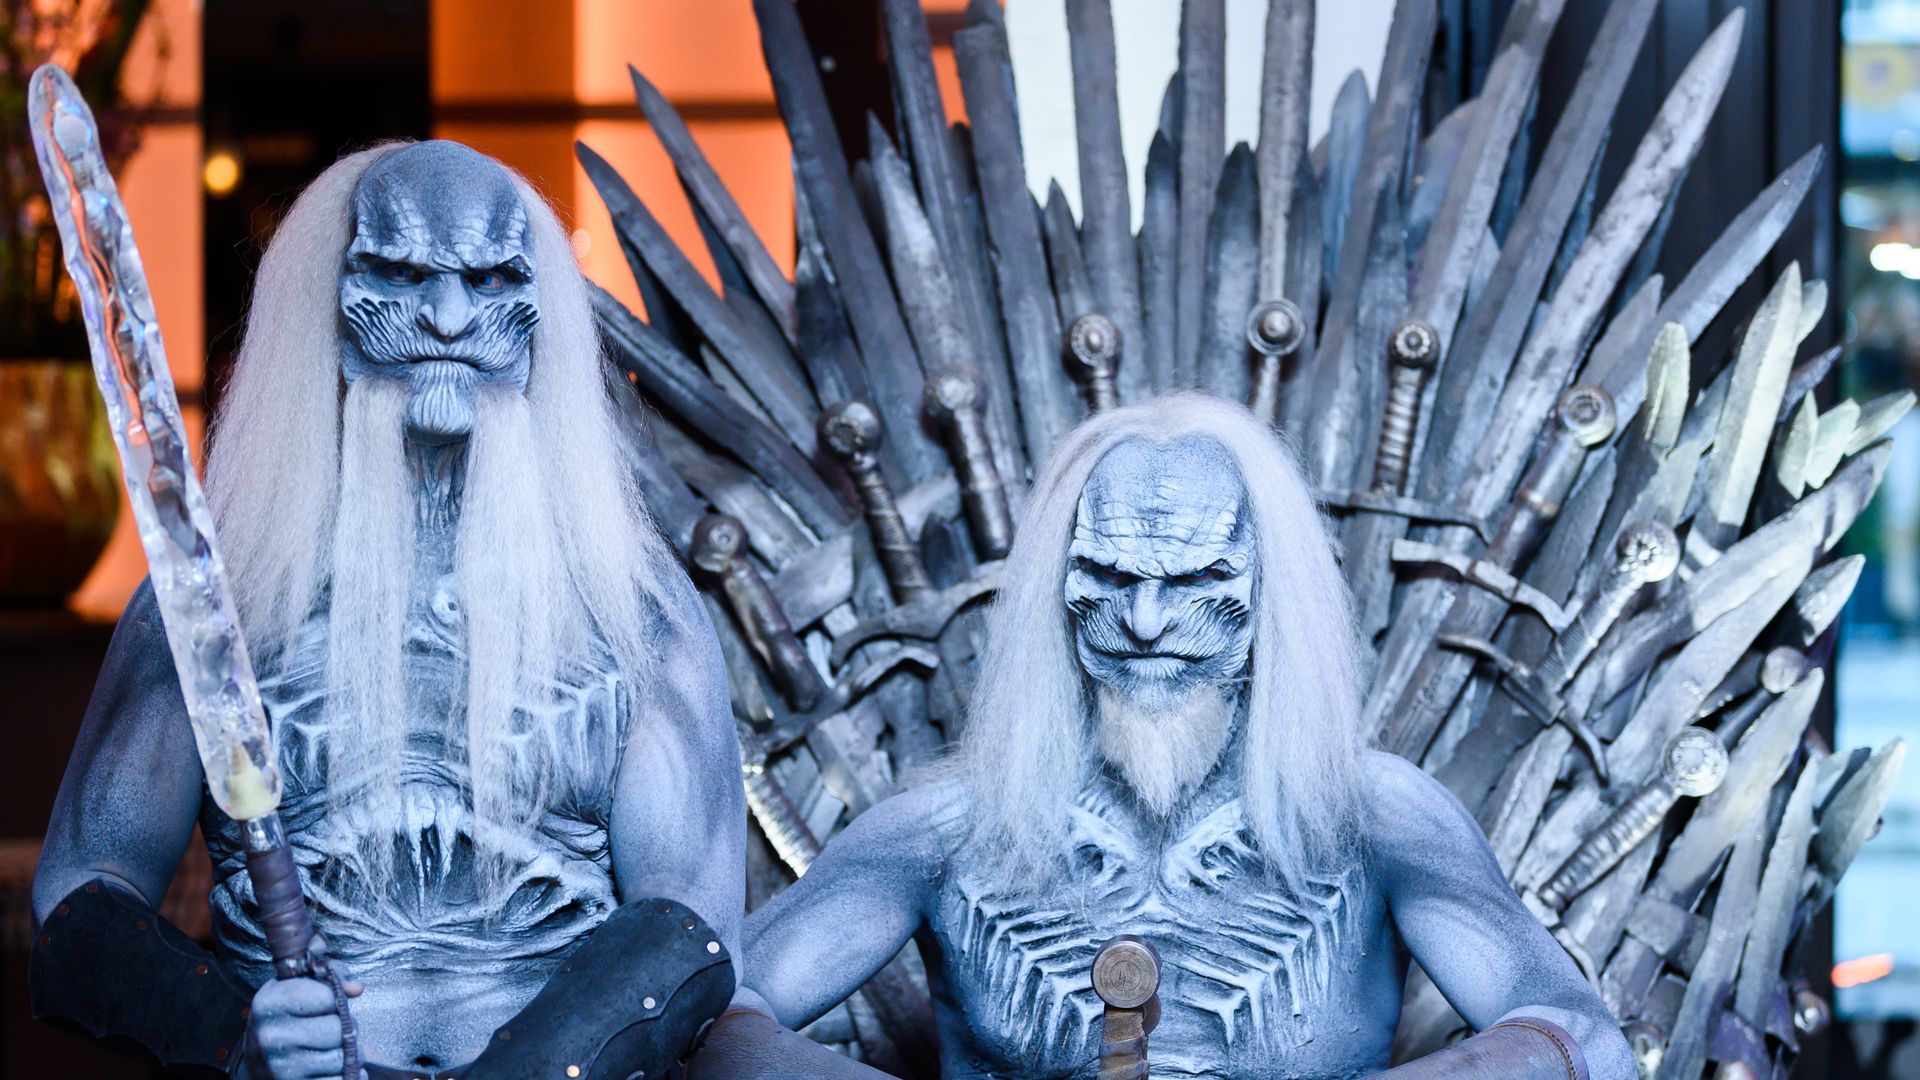 Whitewalkers from game of thrones